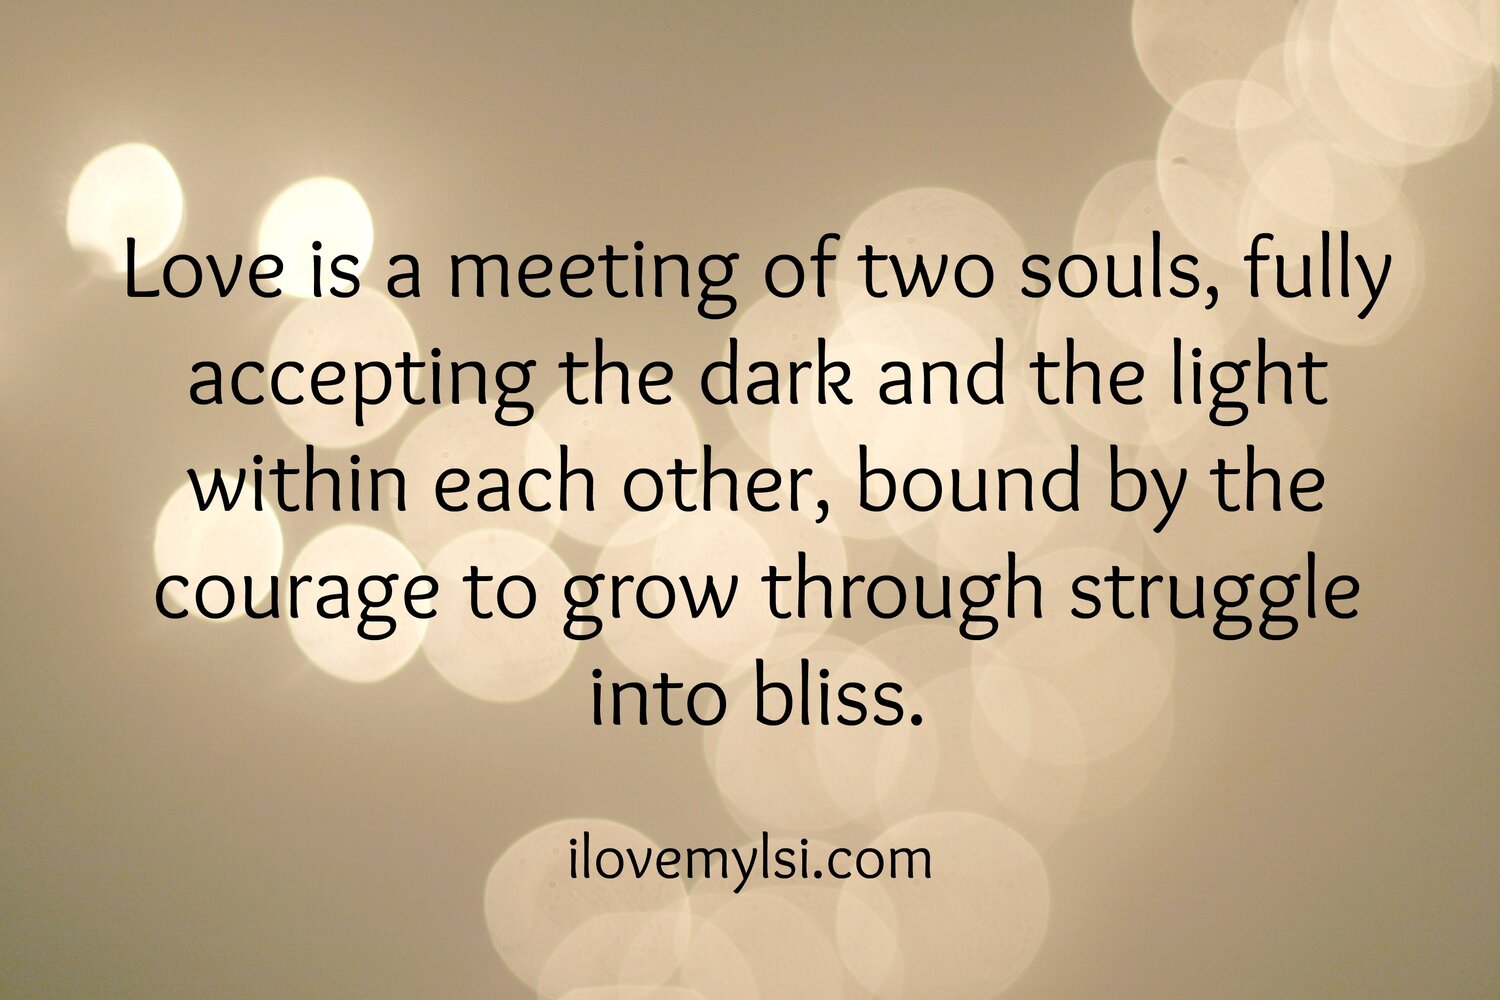 Love-is-a-meeting-of-two-souls..jpg